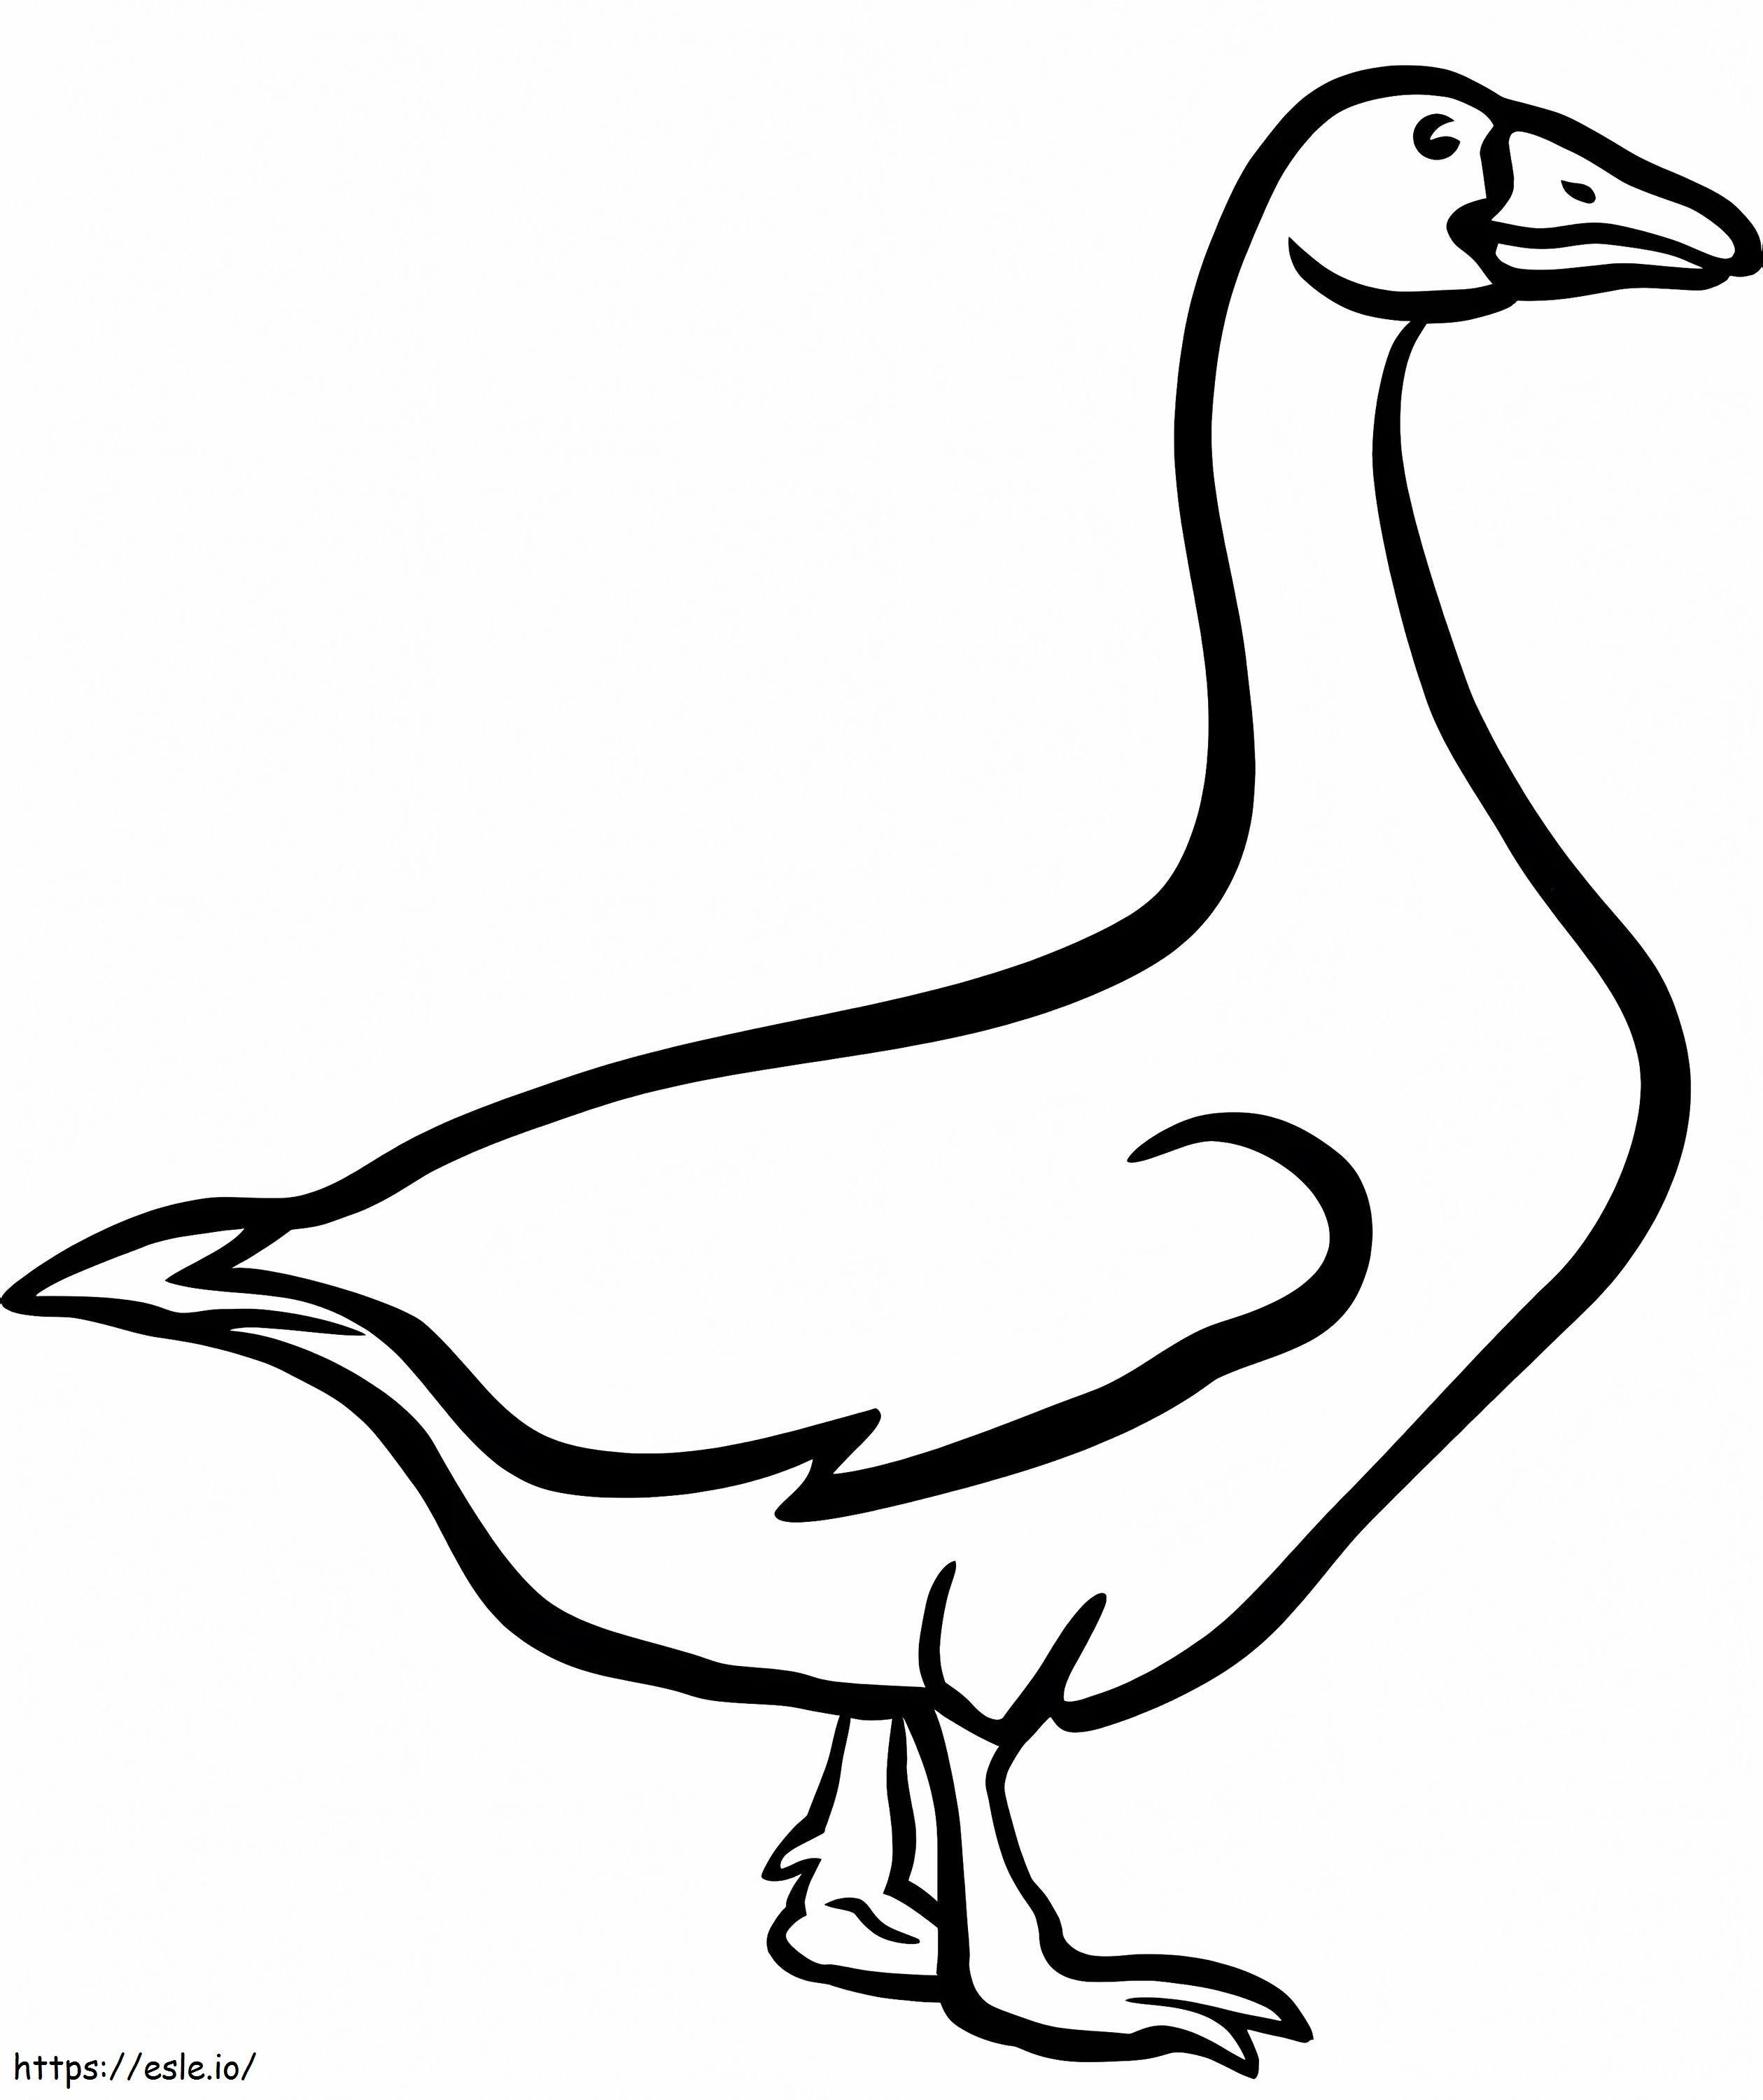 Domestic Goose coloring page